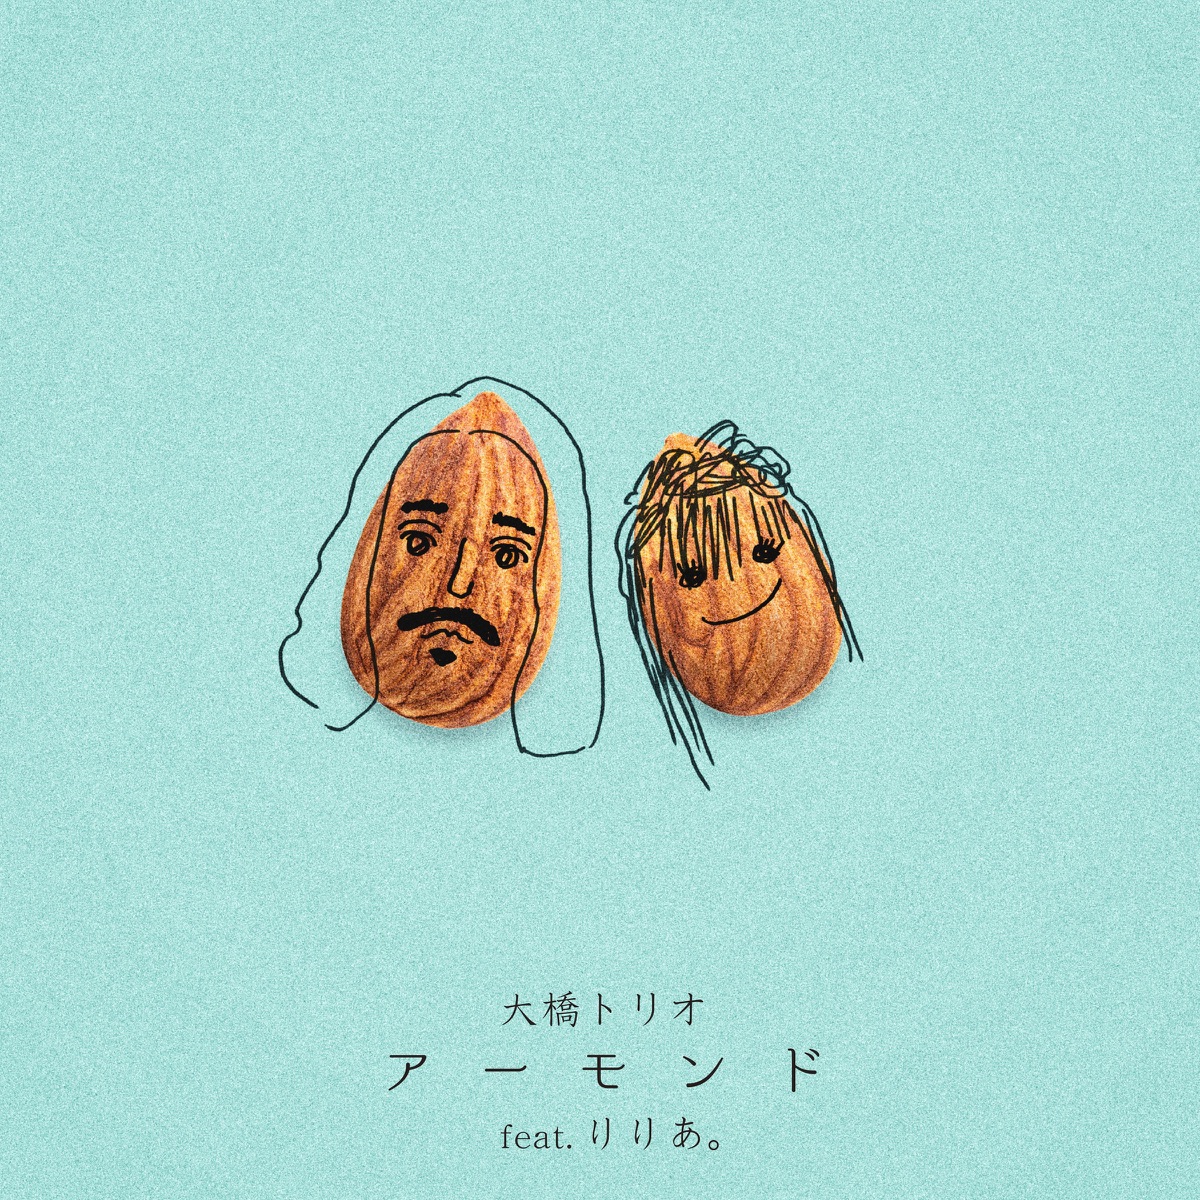 Cover art for『Ohashi Trio - アーモンド feat. りりあ。』from the release『Almond feat. Riria.